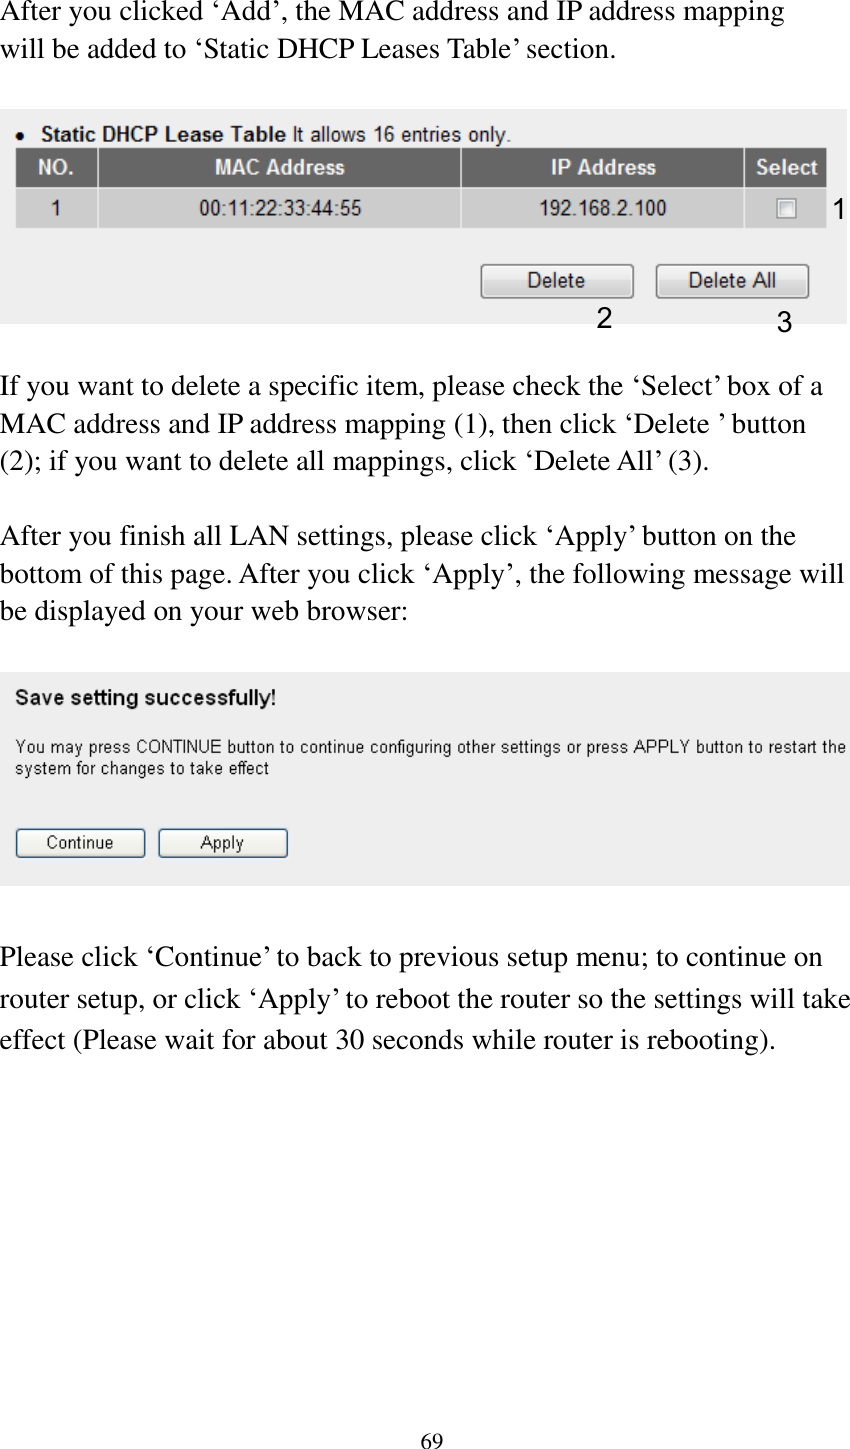 69  After you clicked „Add‟, the MAC address and IP address mapping will be added to „Static DHCP Leases Table‟ section.    If you want to delete a specific item, please check the „Select‟ box of a MAC address and IP address mapping (1), then click „Delete ‟ button (2); if you want to delete all mappings, click „Delete All‟ (3).    After you finish all LAN settings, please click „Apply‟ button on the bottom of this page. After you click „Apply‟, the following message will be displayed on your web browser:    Please click „Continue‟ to back to previous setup menu; to continue on router setup, or click „Apply‟ to reboot the router so the settings will take effect (Please wait for about 30 seconds while router is rebooting). 1 2 3 